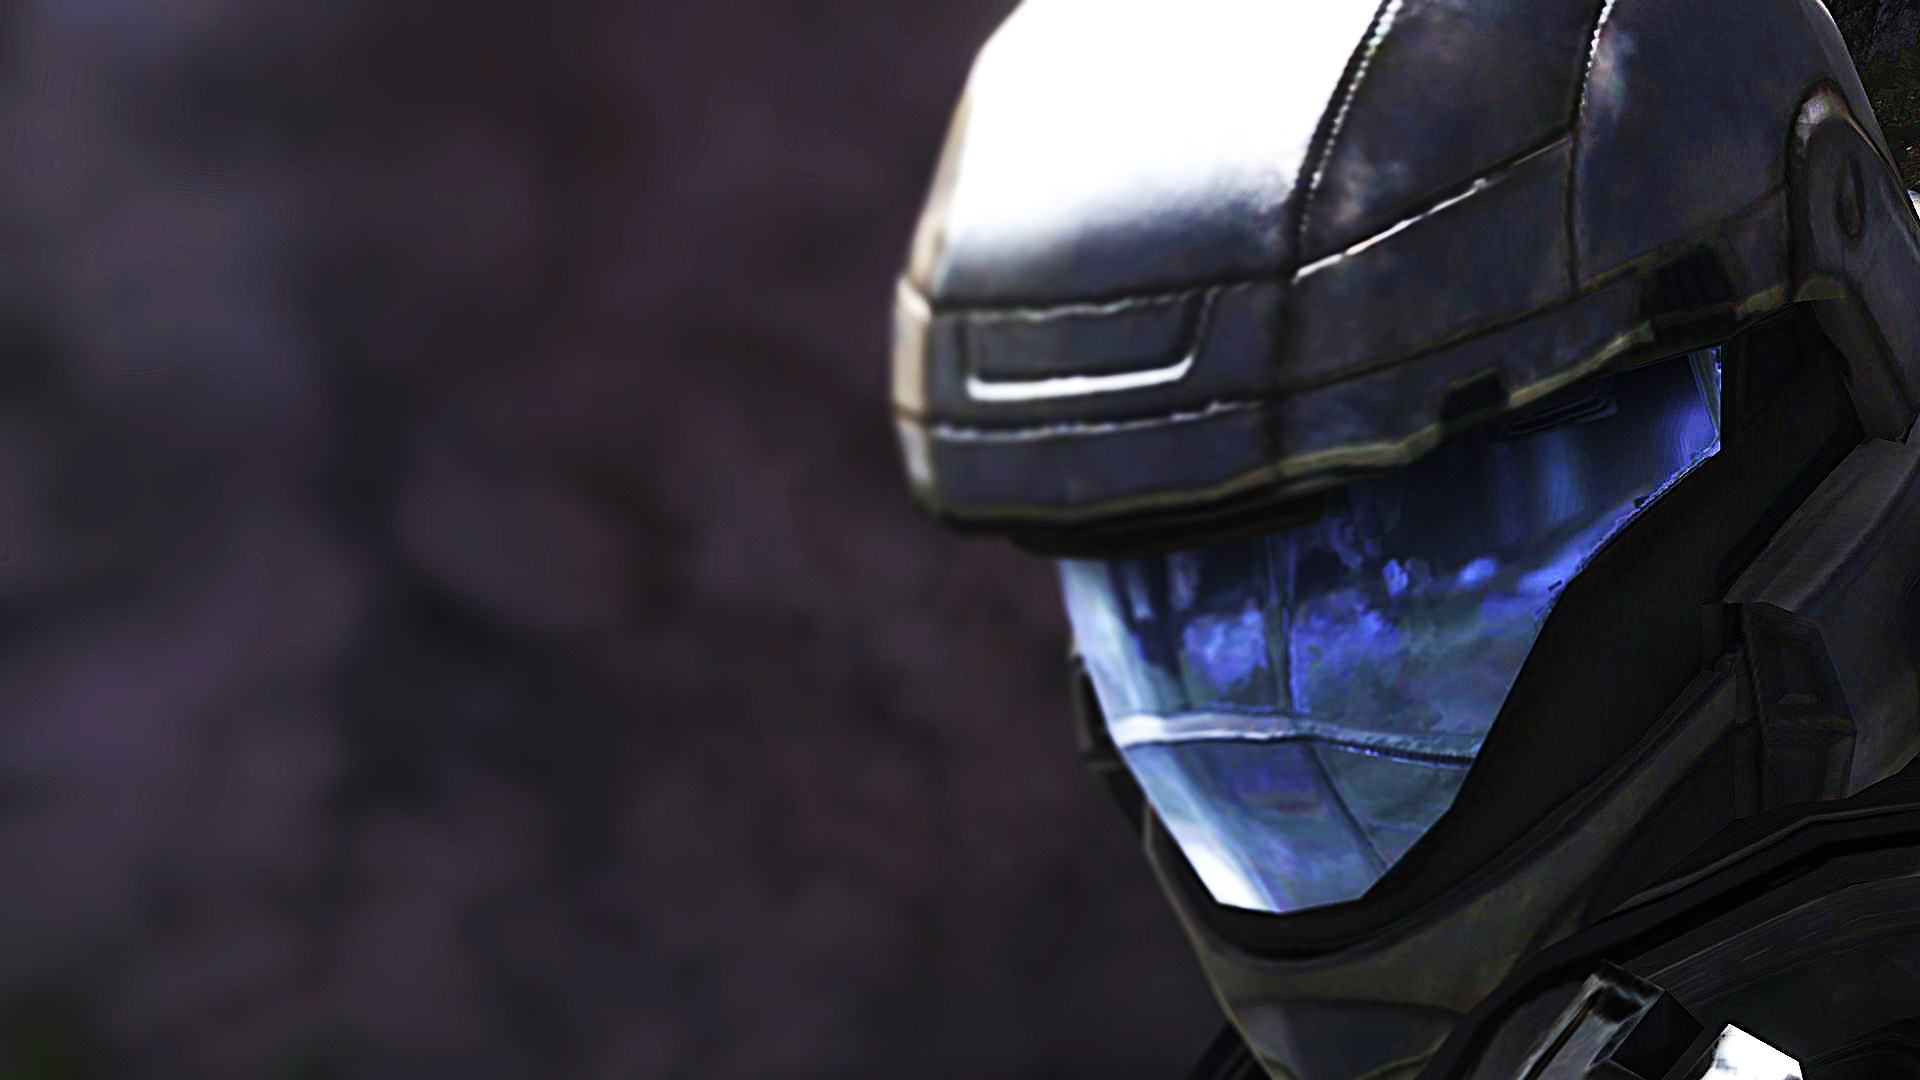 Download the Halo Cinematic Wallpaper, Halo Cinematic iPhone ...